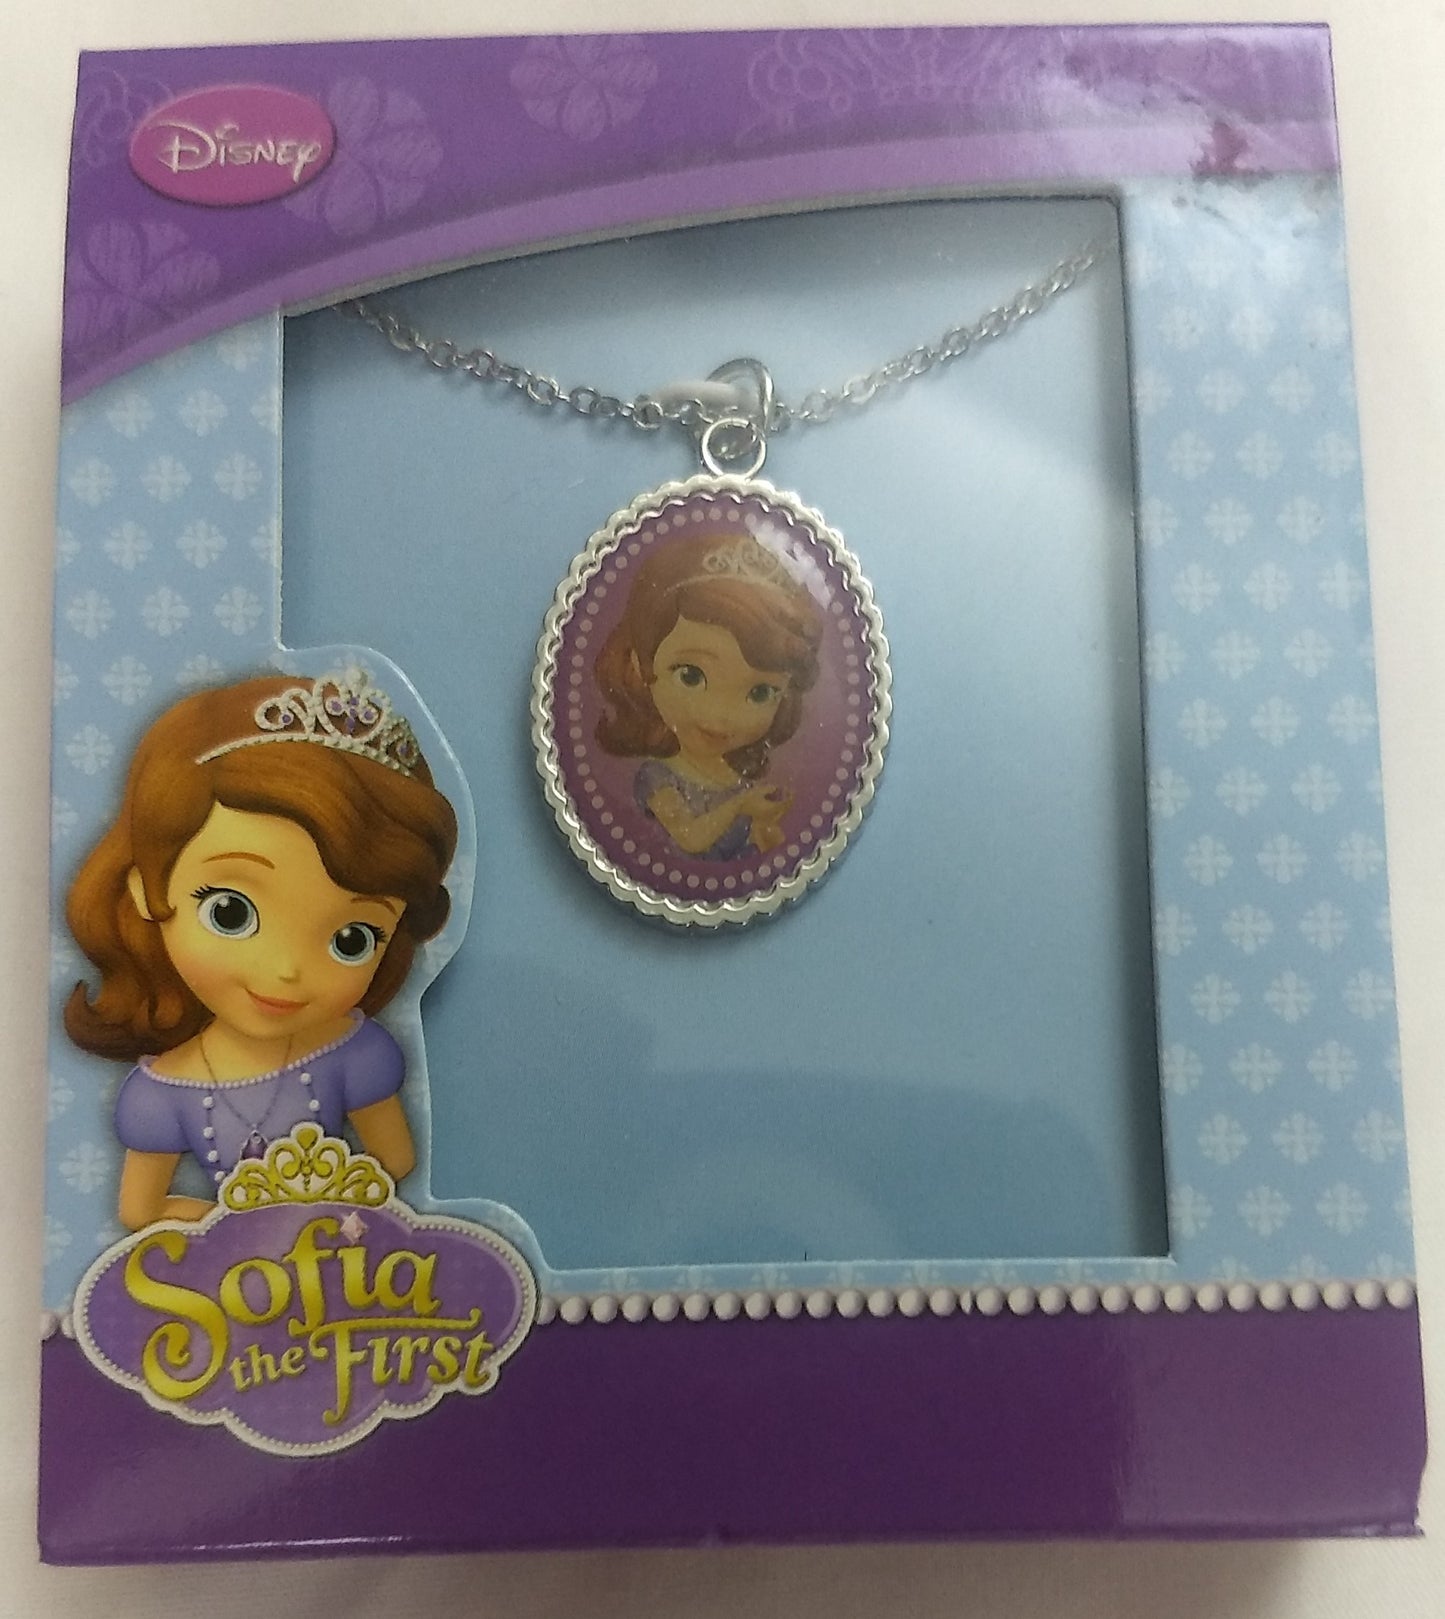 Disney Princess Sofia First Oval Pendant Necklace 16" Chain with 2" Extension